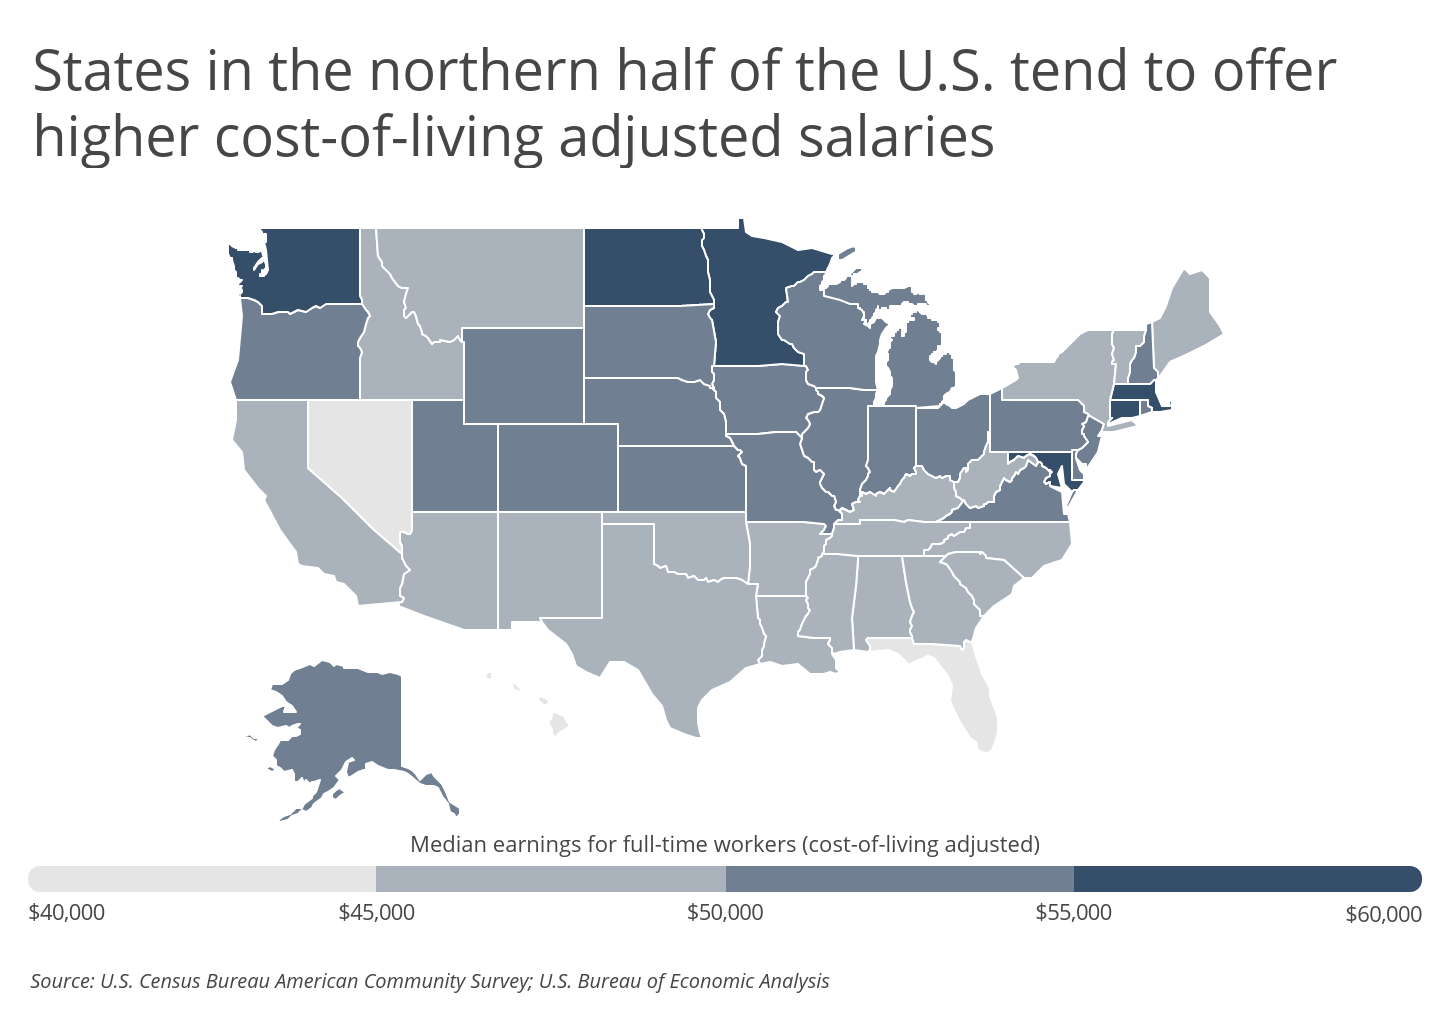 US cities with the highest costofliving adjusted salaries